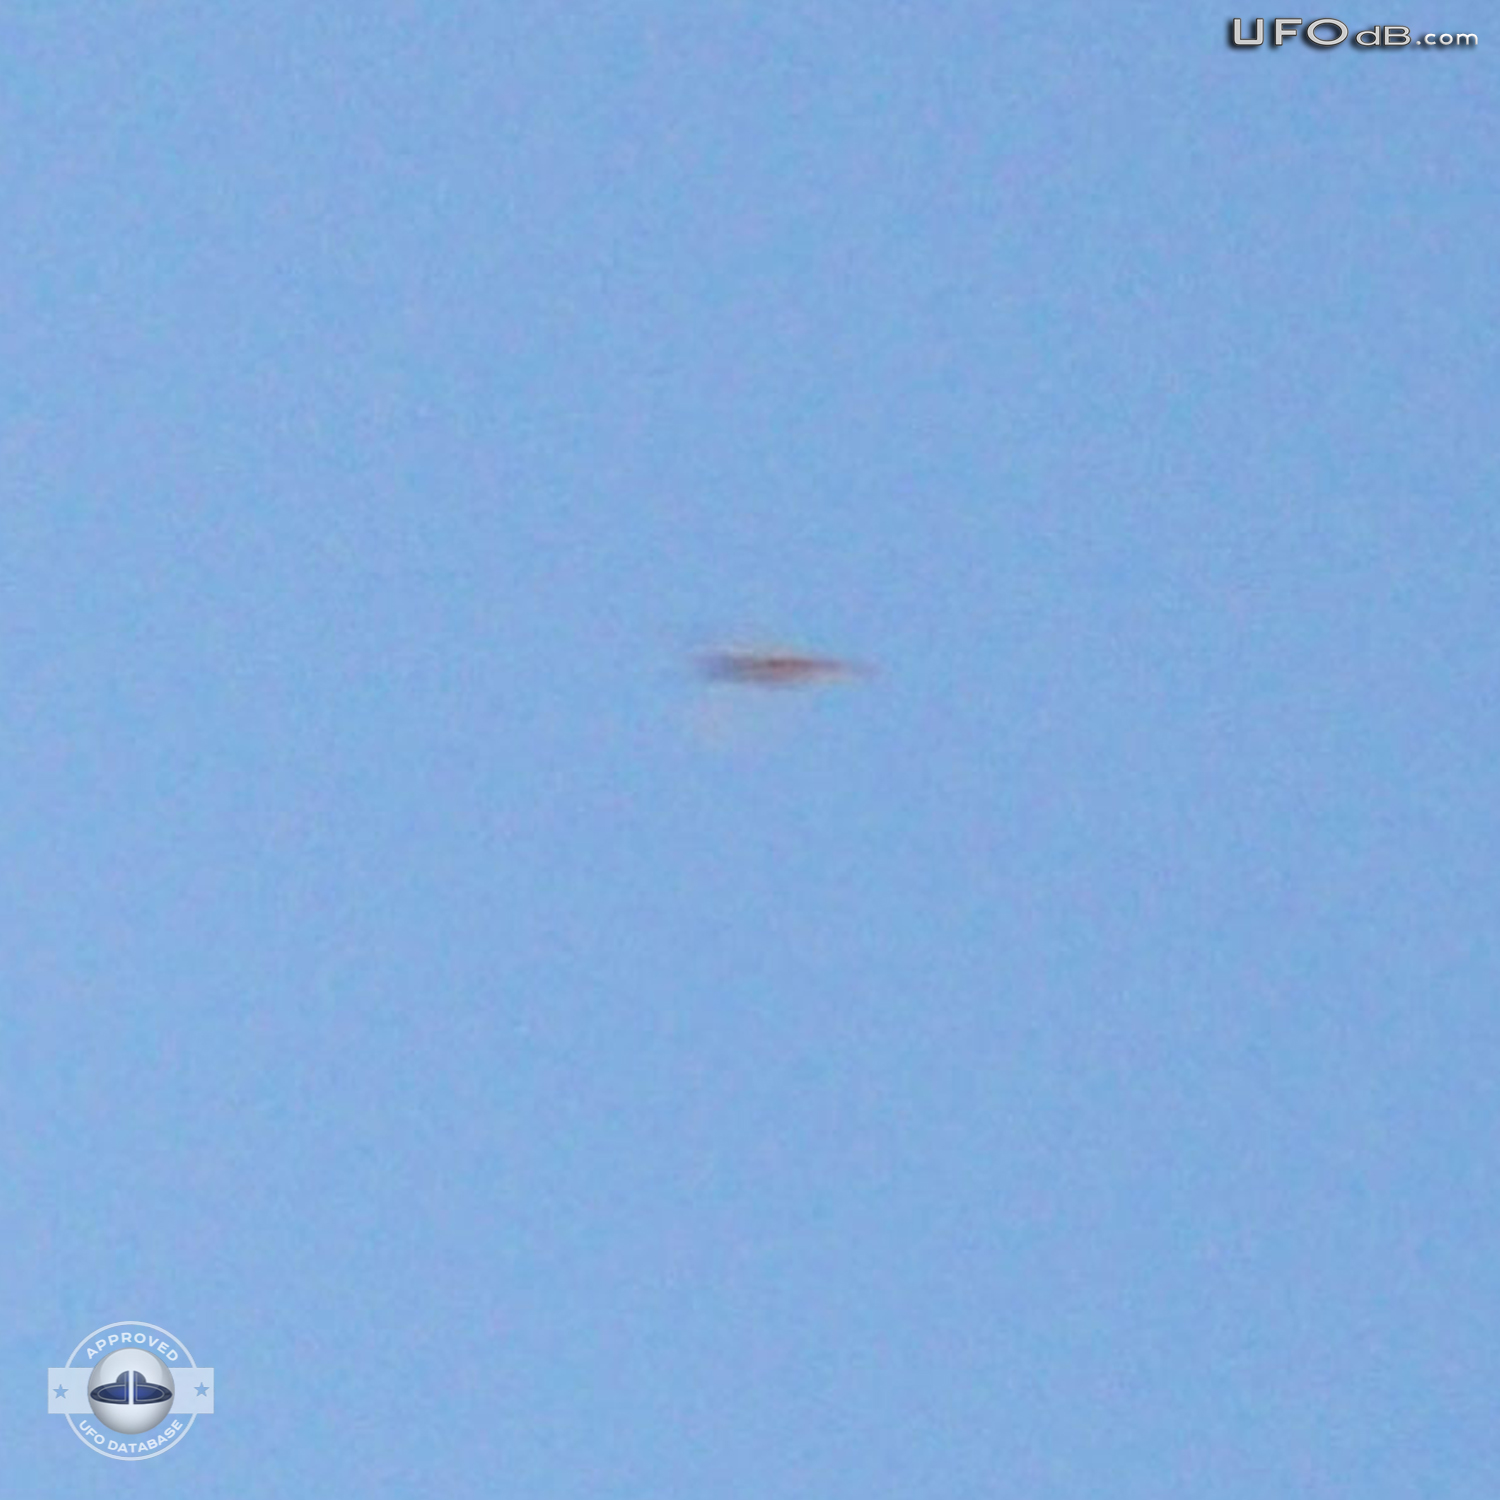 Photo Contest shot capture a passing UFO in Uruguay | May 18 2011 UFO Picture #329-3